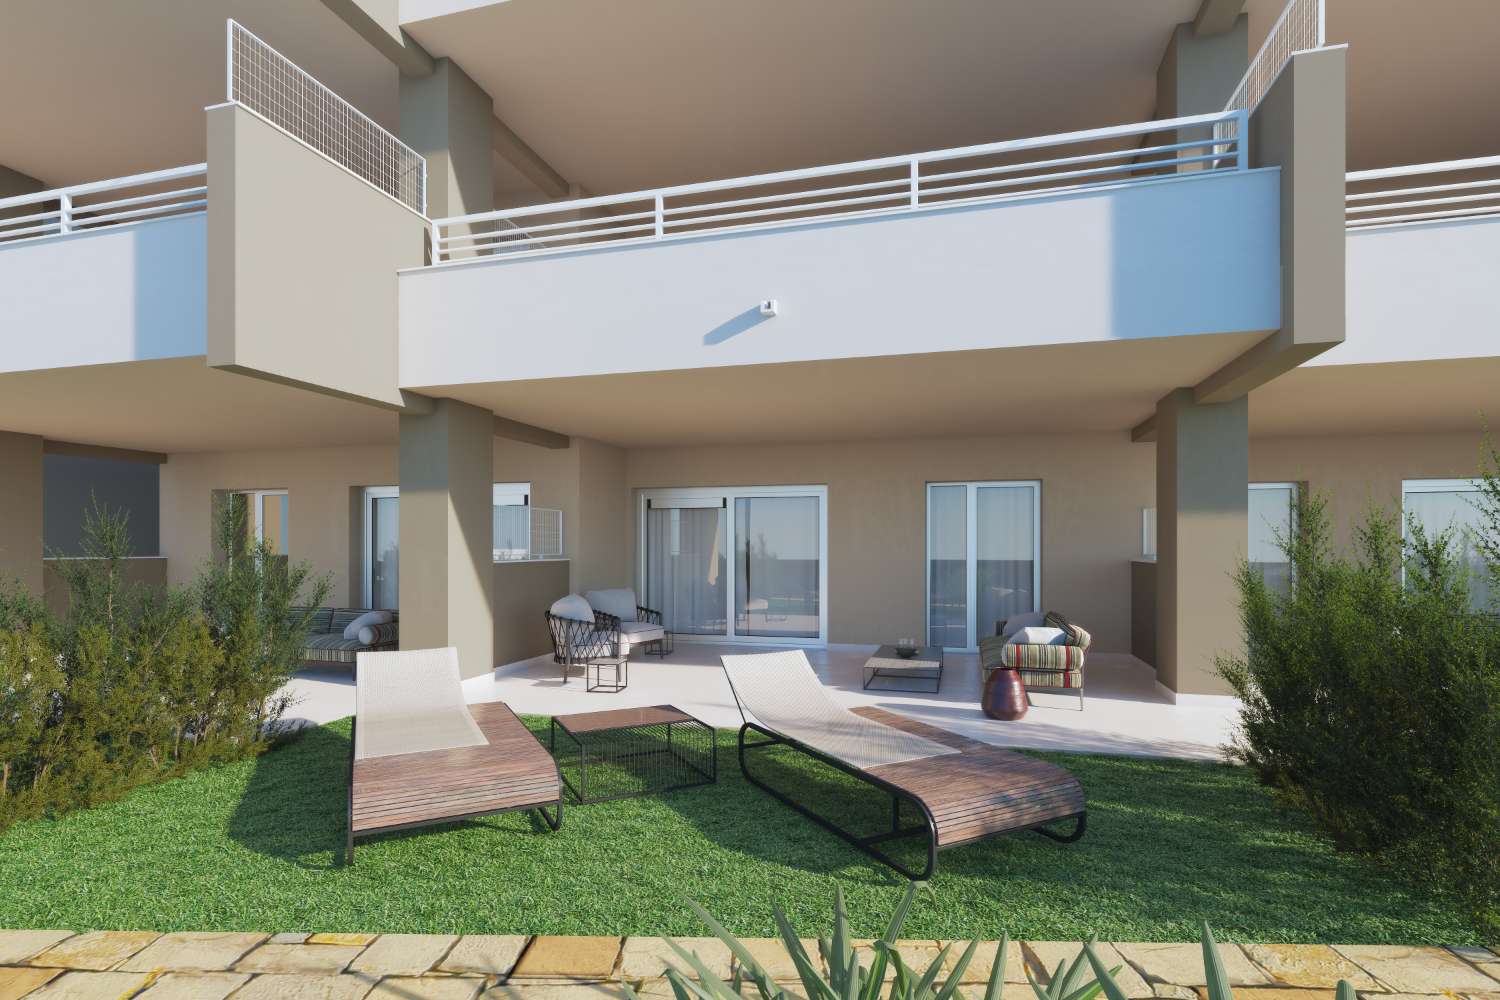 NEW BUILD APARTMENTS AND PENTHOUSES FOR SALE IN ESTEPONA, COSTA DEL SOL